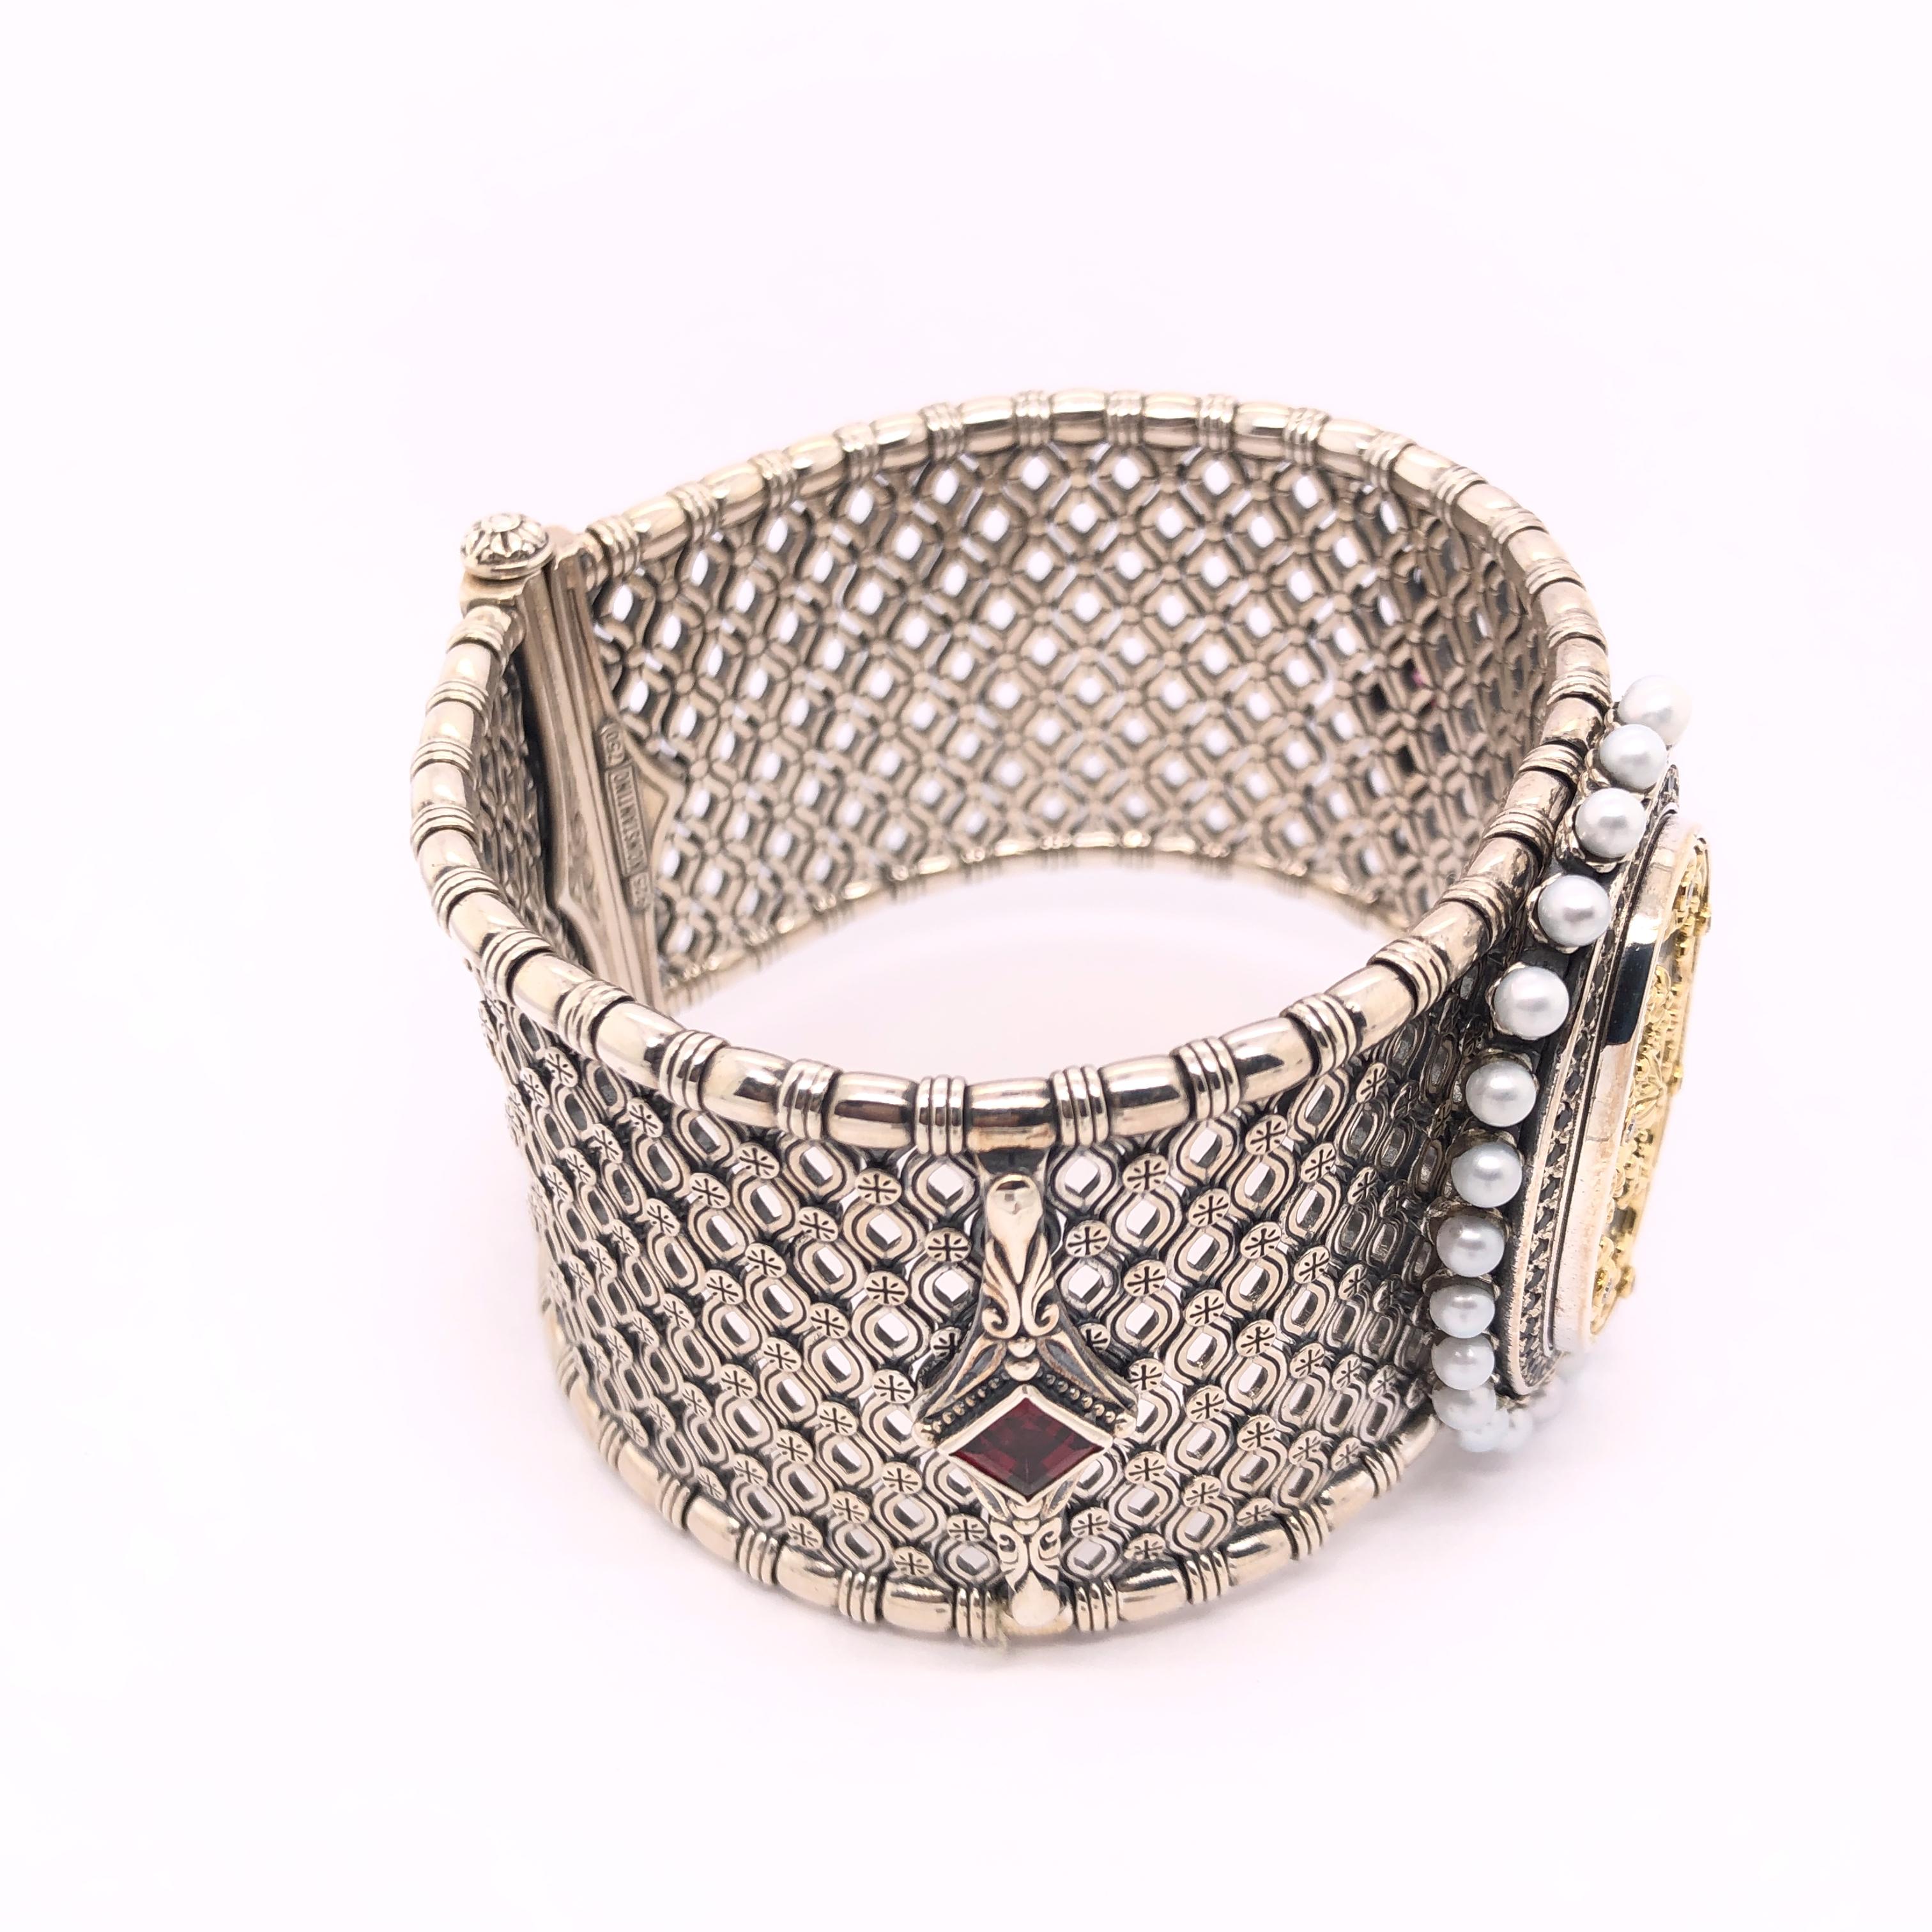 Contemporary Konstantino Mother of Pearl, Spinel, Diamond Sterling Silver & 18k Gold Bracelet